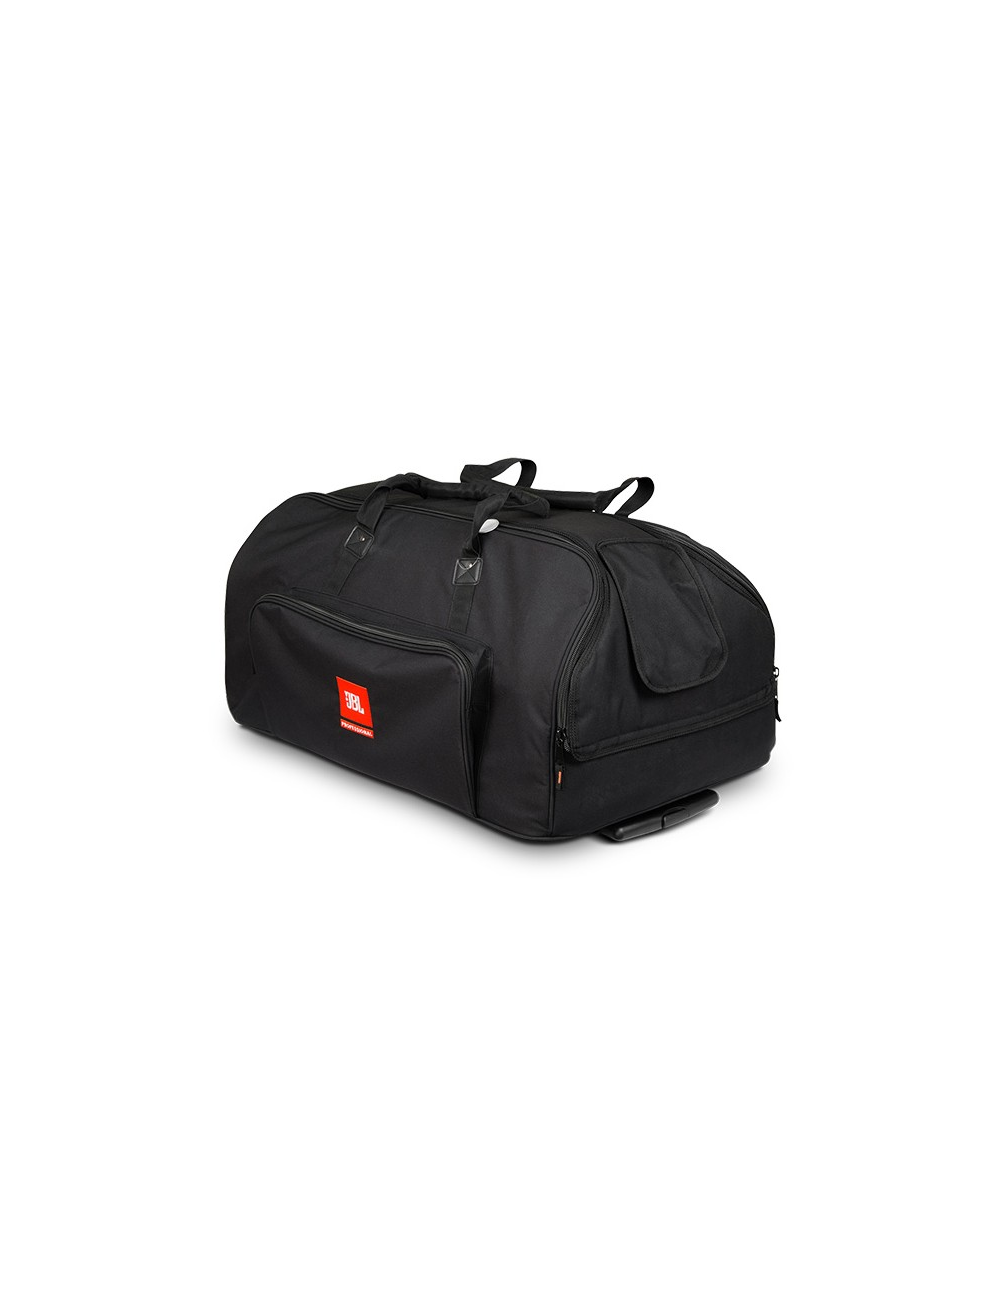 EON615 carrying bag with wheels